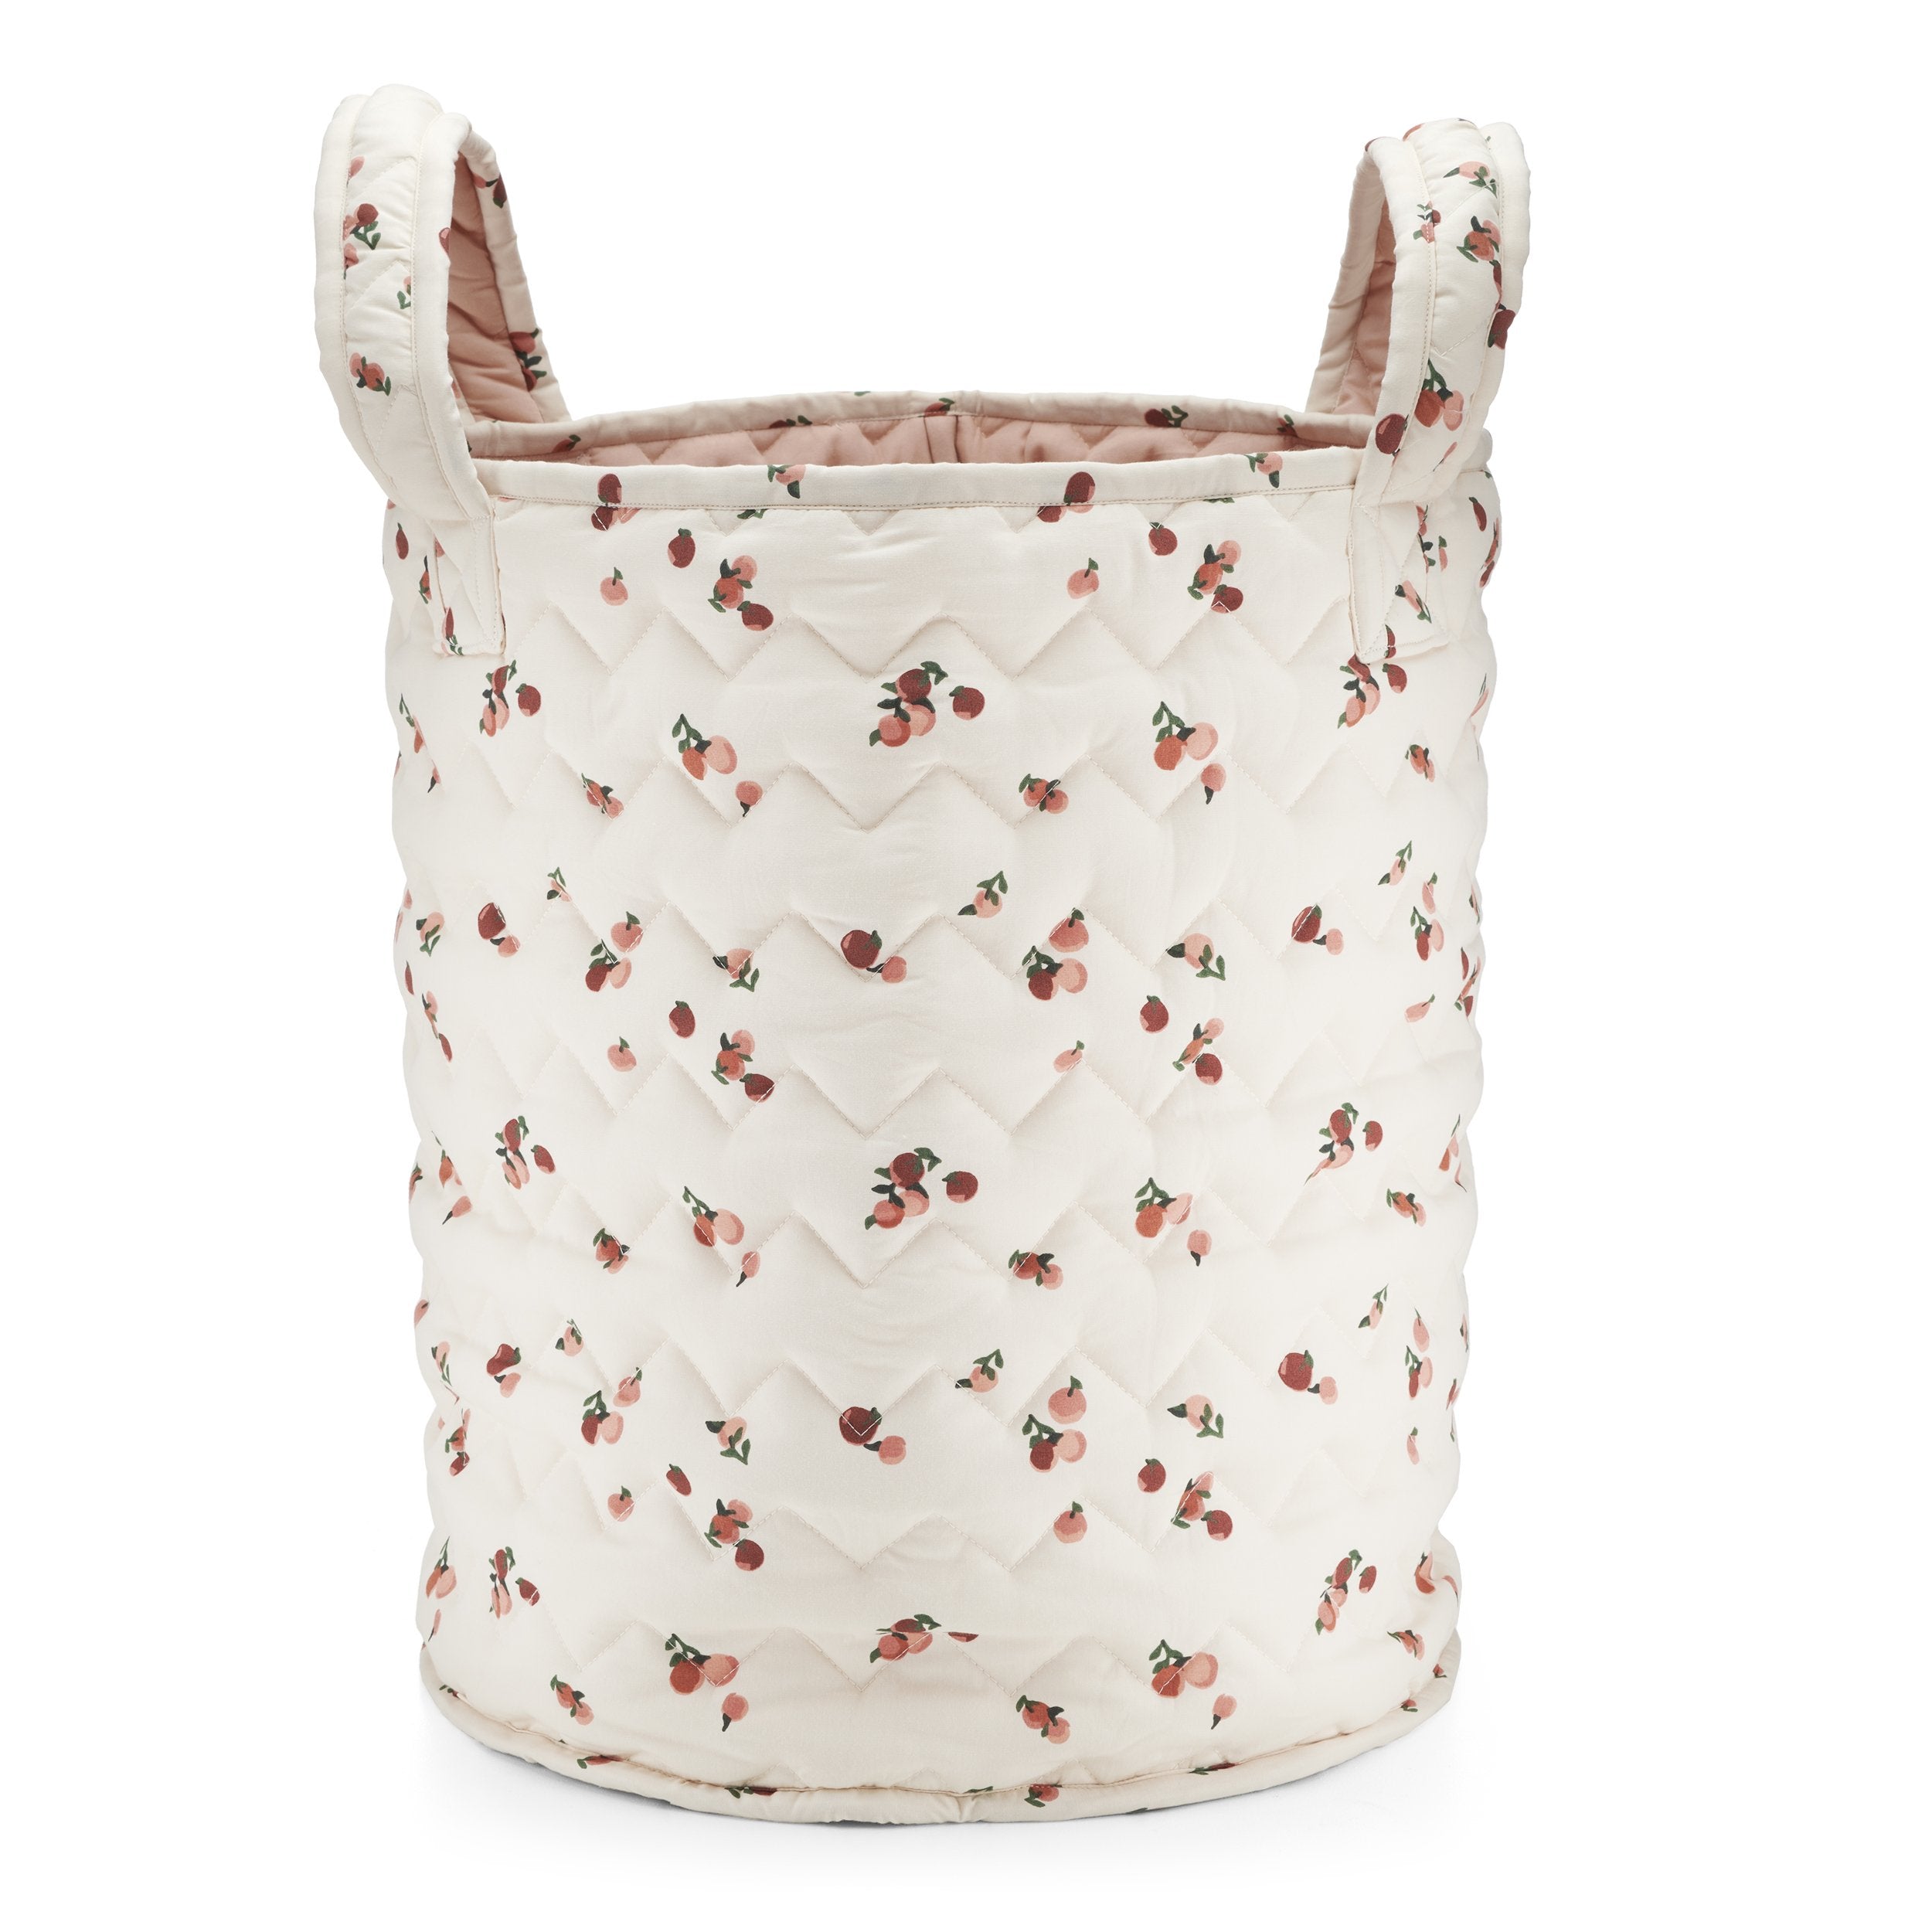 Large Quilted Storage Basket - Peaches - Avery Row